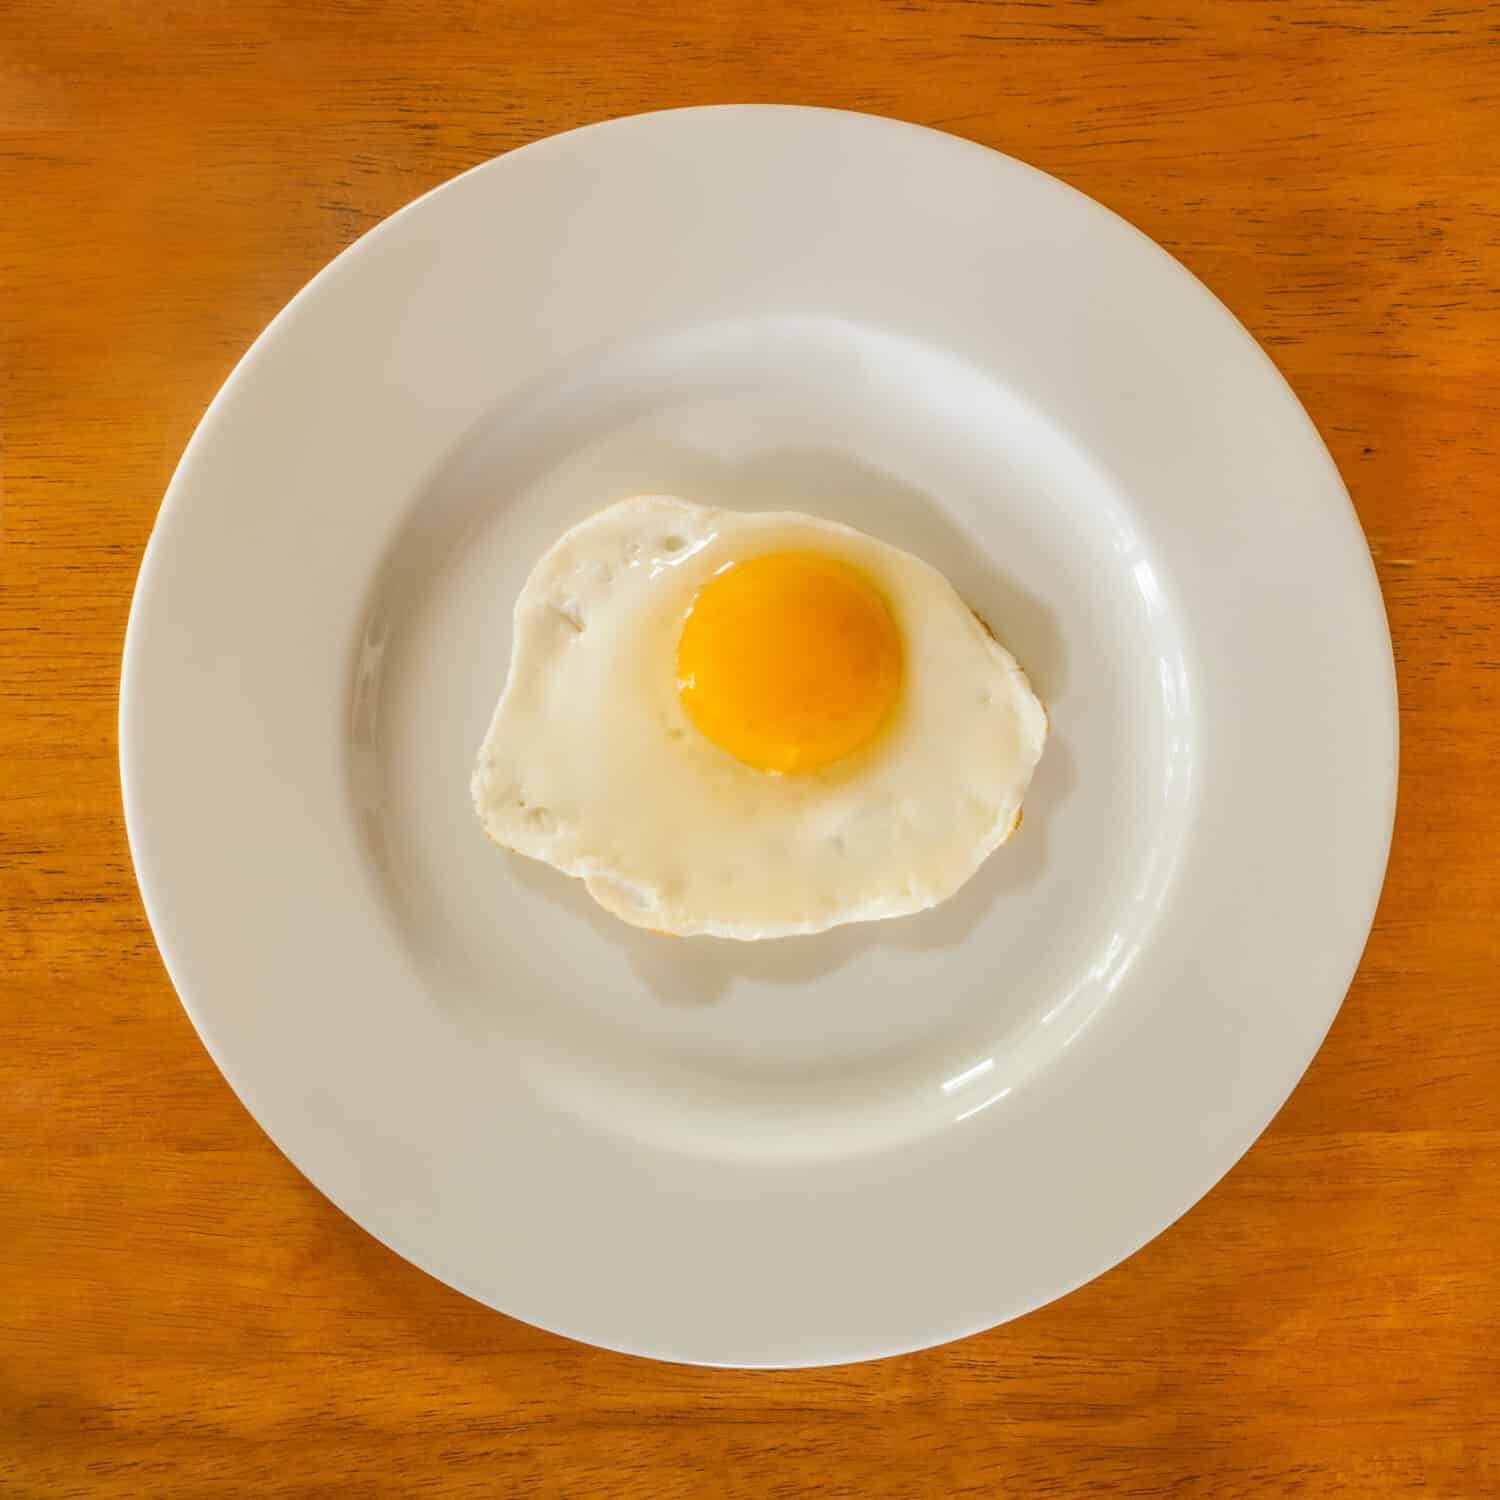 Sunny side up egg on a white plate